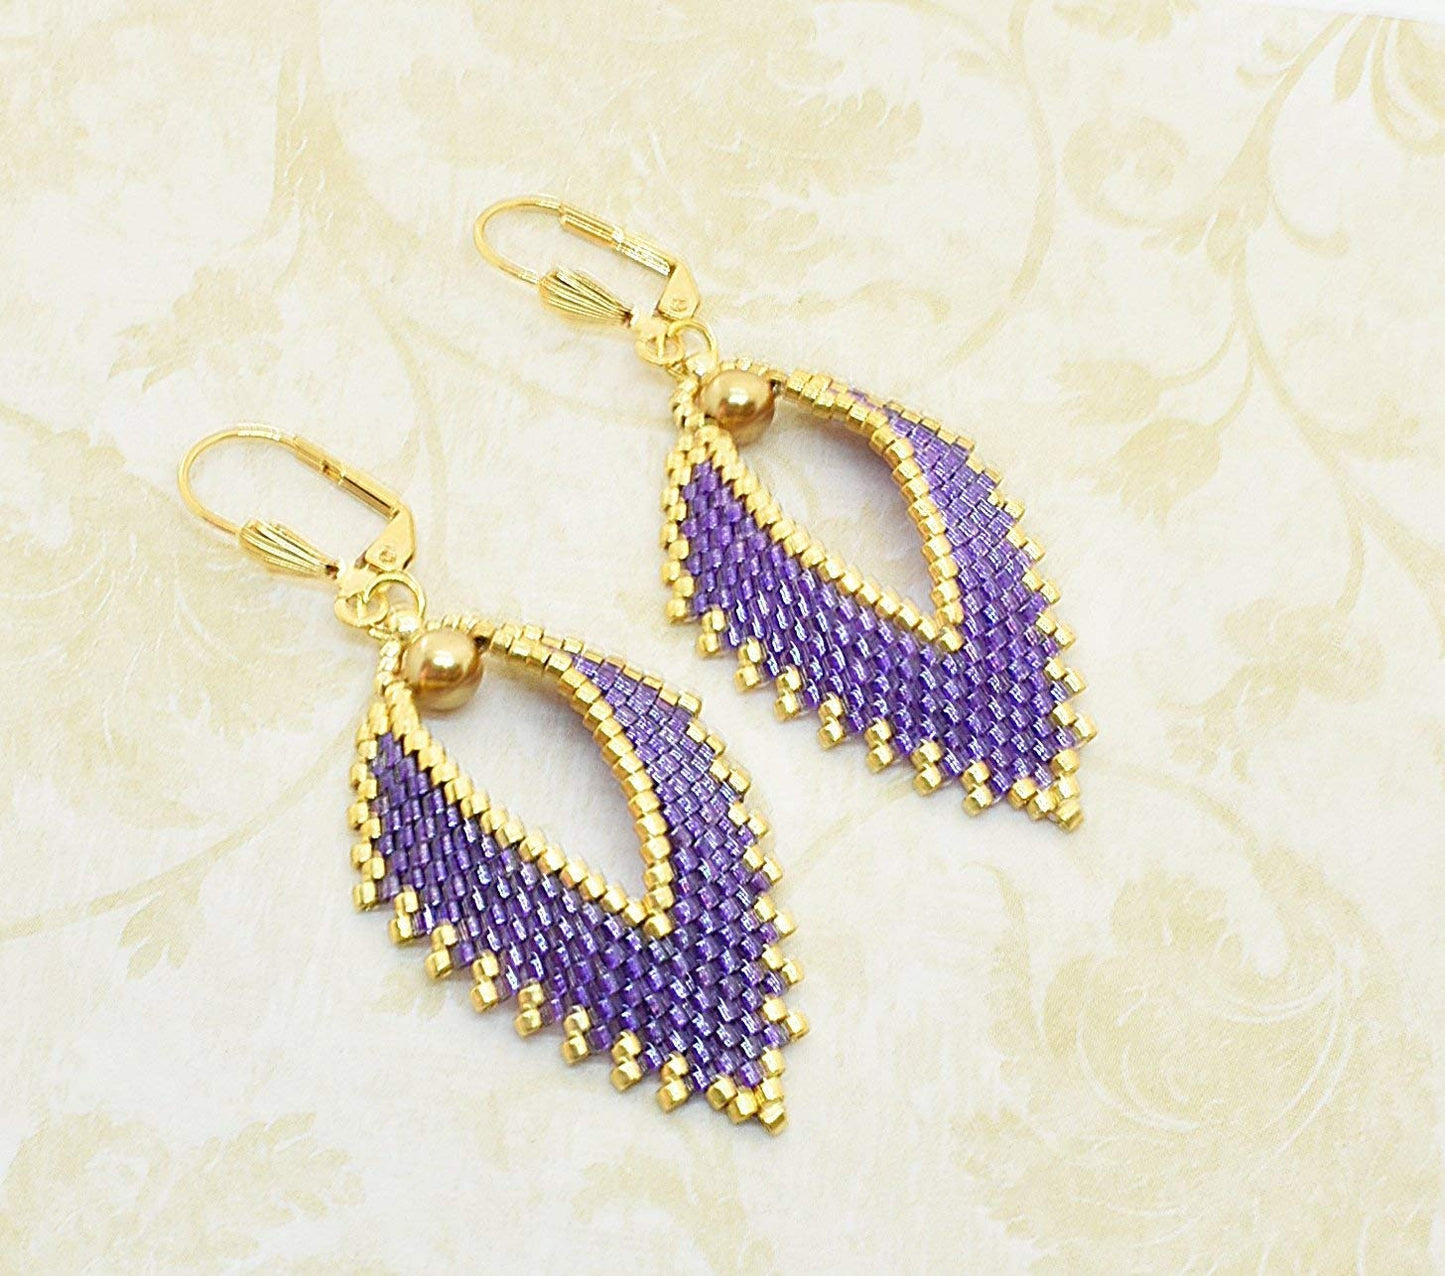 Russian Leaf Beaded Earrings - The Jewel Tones (10 colors) - Chic Brico